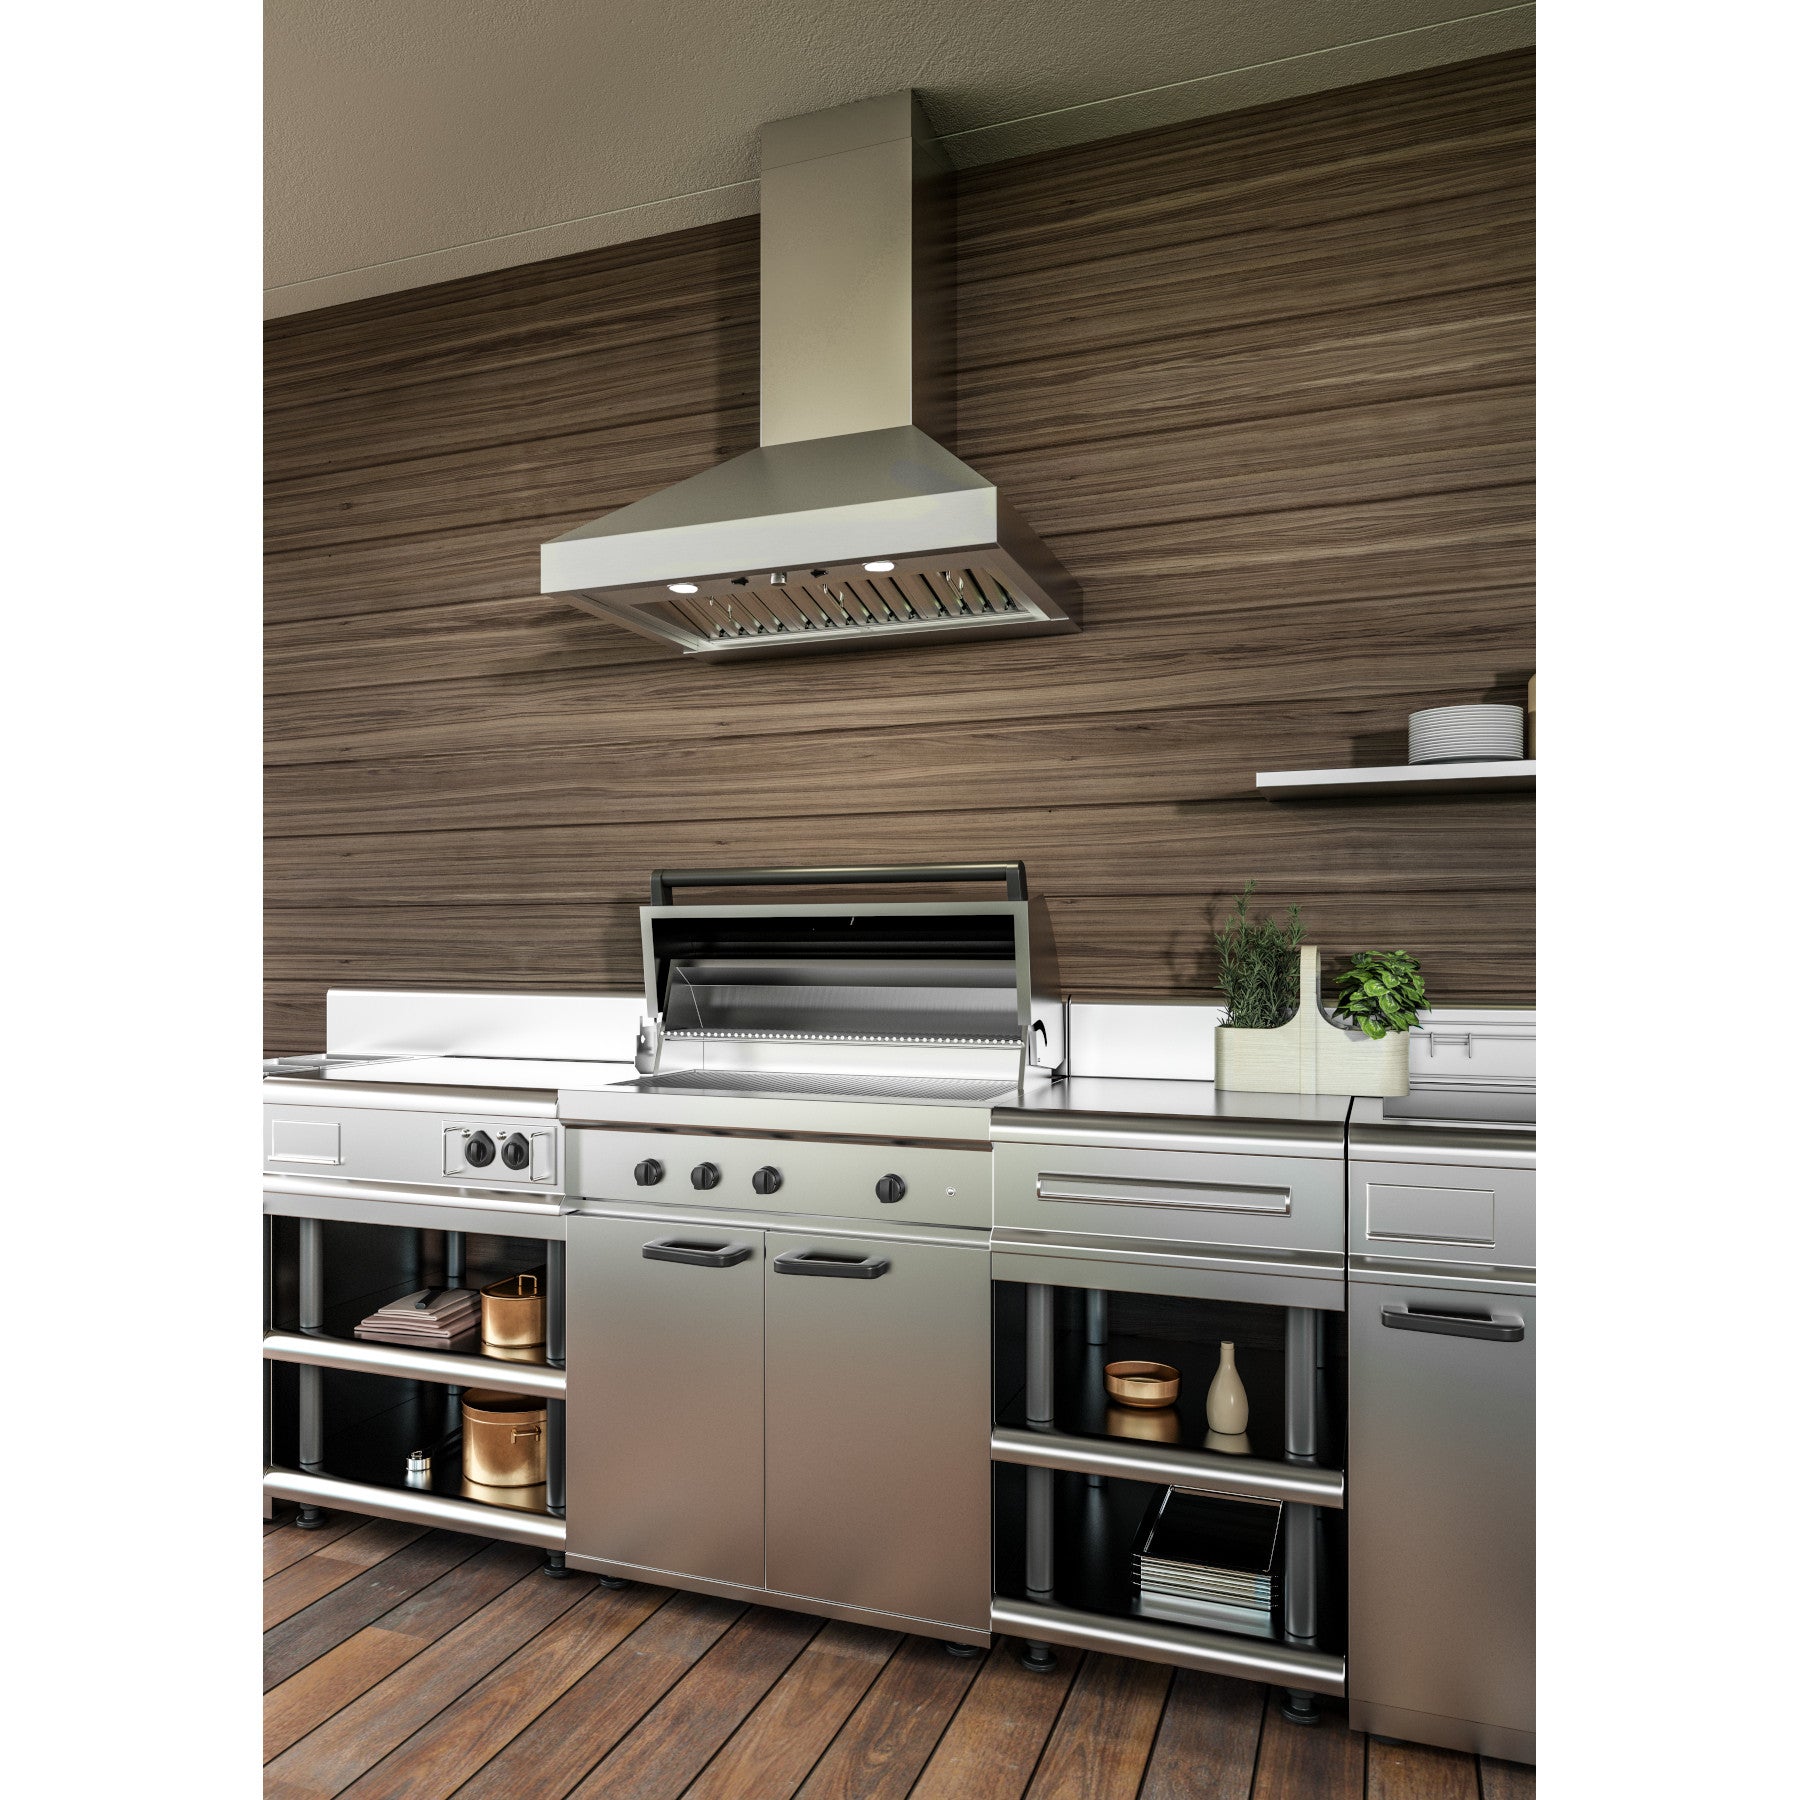 Best - 47.88 Inch Outdoor Range Hood Vent in Stainless - WTD9M48SB